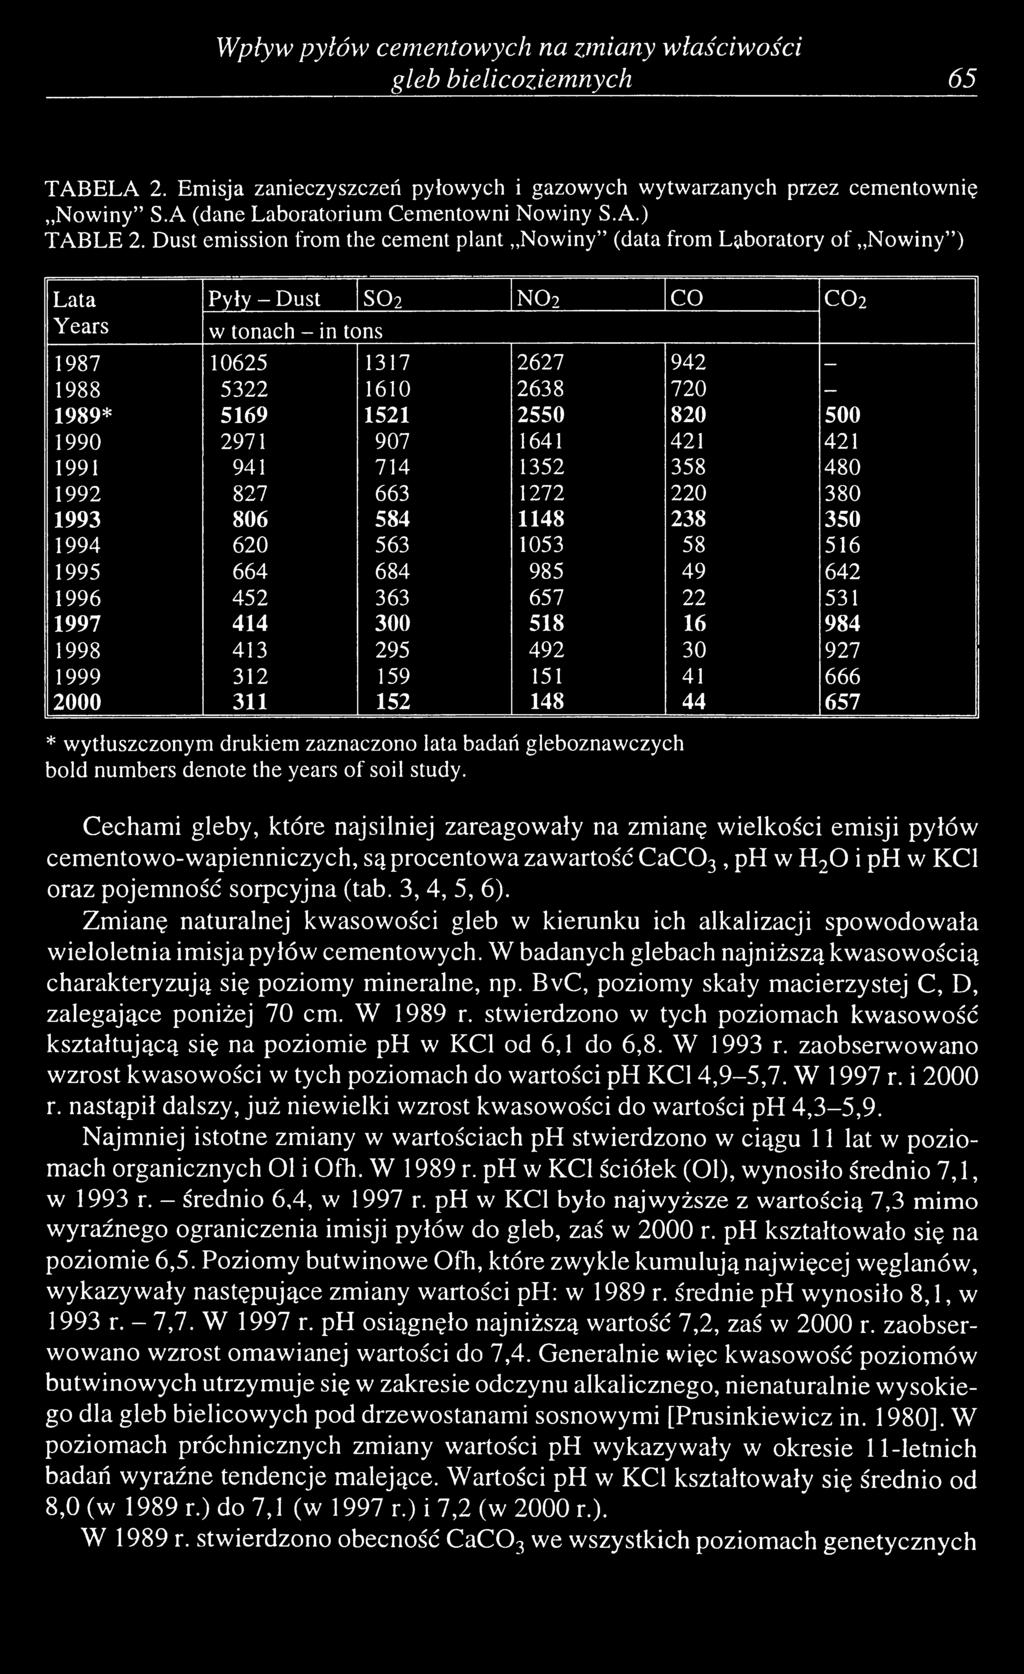 Dust emission from the cement plant Nowiny (data from Laboratory of Nowiny ) Lata Pyły - Dust S 0 2 NO2 СО C 0 2 Years w tonach - in tons 1987 10625 1317 2627 942 1988 5322 1610 2638 720-1989* 5169